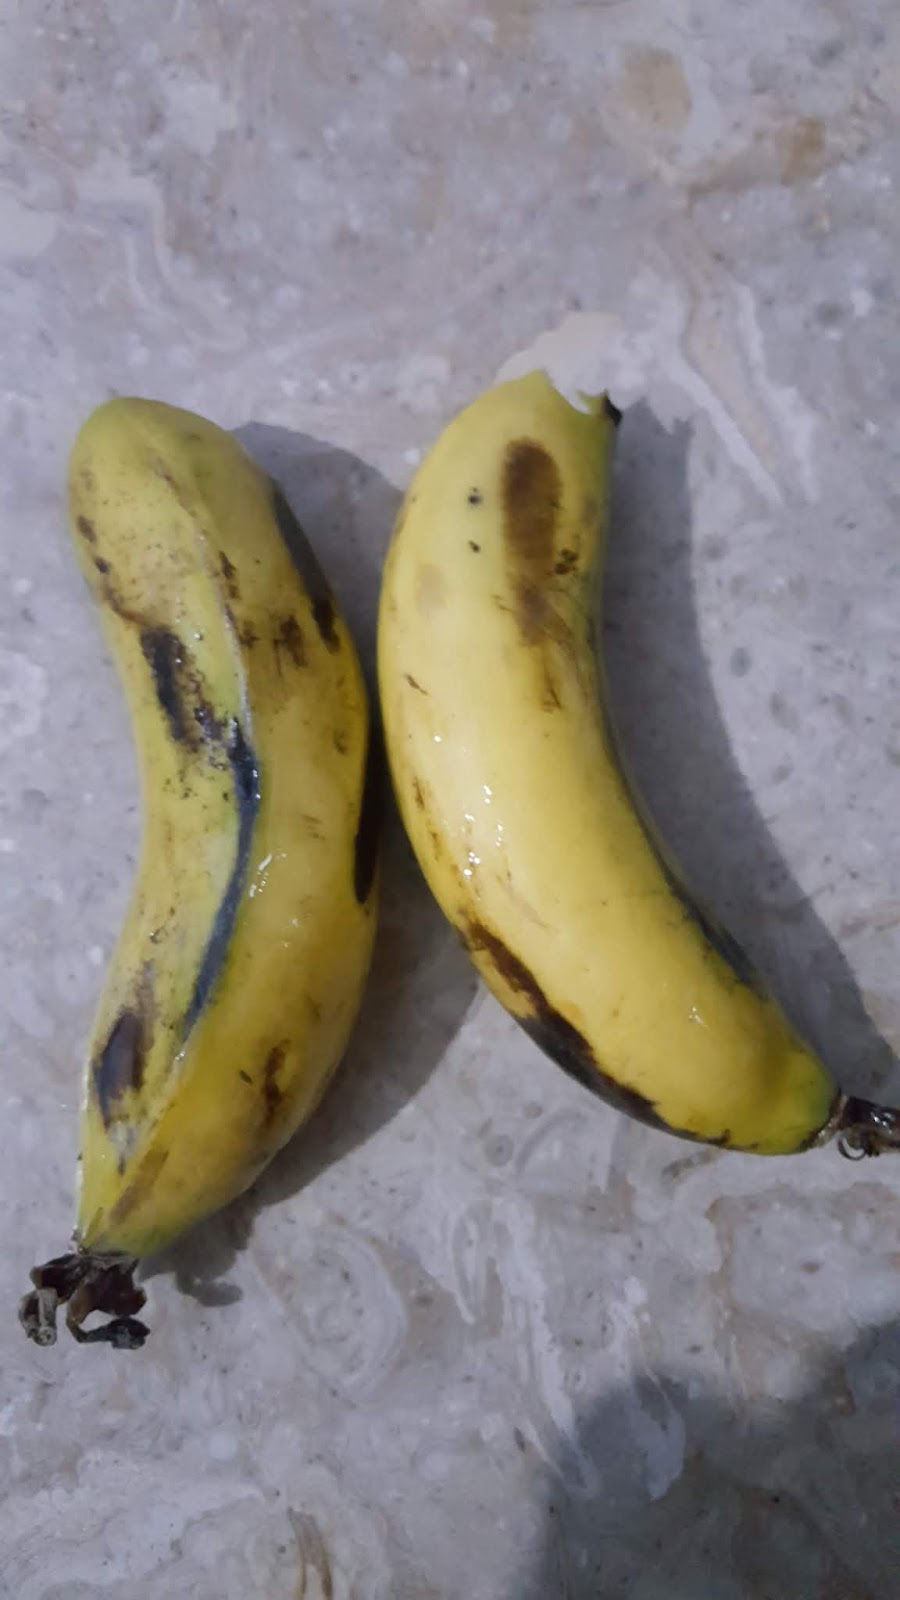 The Banana and its Seed | Tips Provider